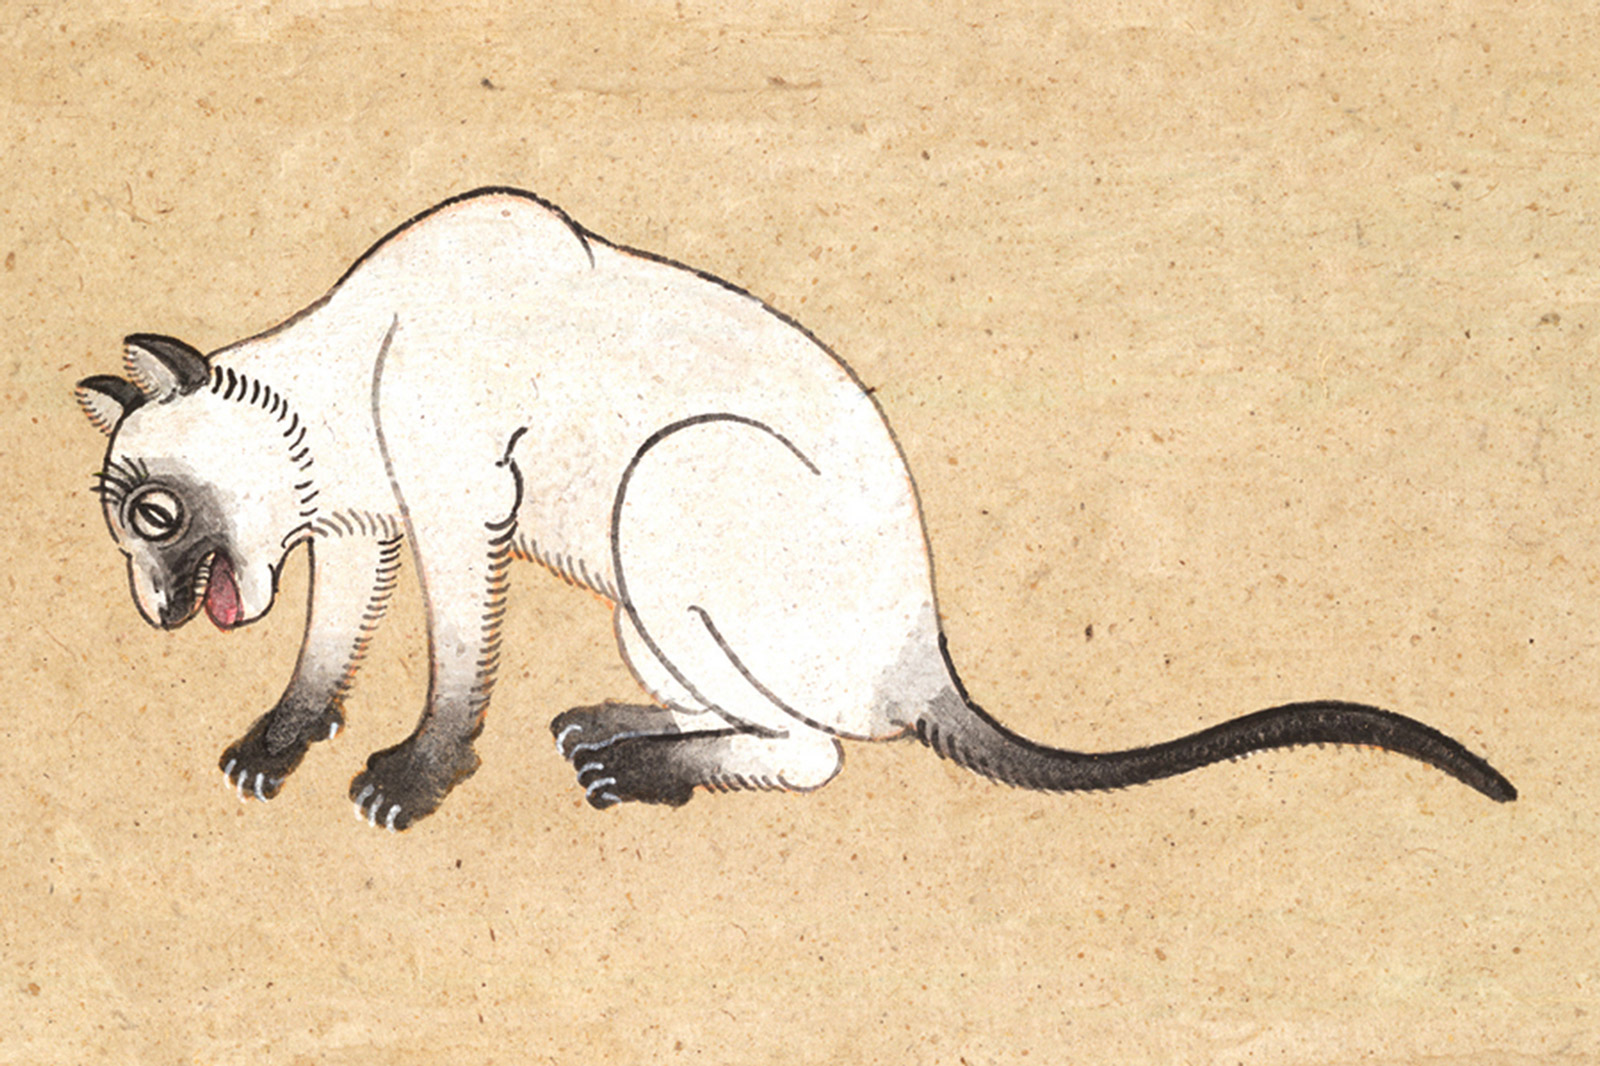 An illustration of a Wichien Maas (Moon Diamond) cat from a mid-nineteenth-century manuscript titled “Tamra Maew.” The accompanying caption reads: “Upper mouth, tail, four paws, and two ears,
Eight points of pure black, as stated.
Eye color shines bronze-gray,
The name Moon Diamond for the white fur.”